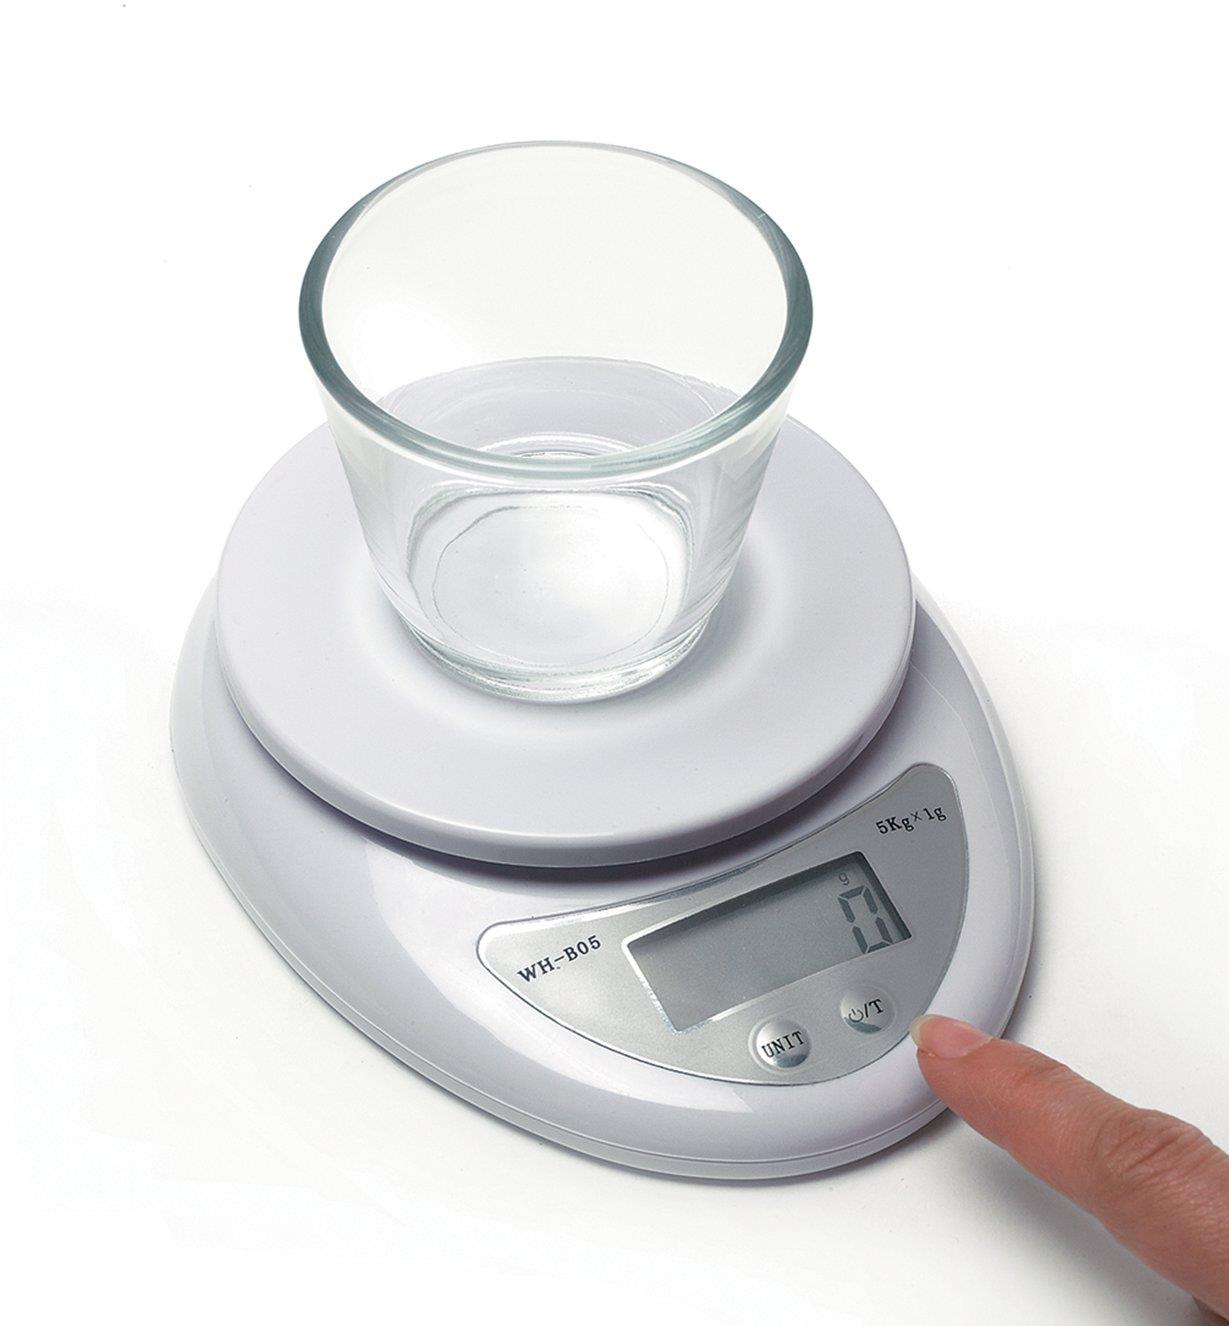 Mini Digital Kitchen Scale set at zero with a glass bowl on it